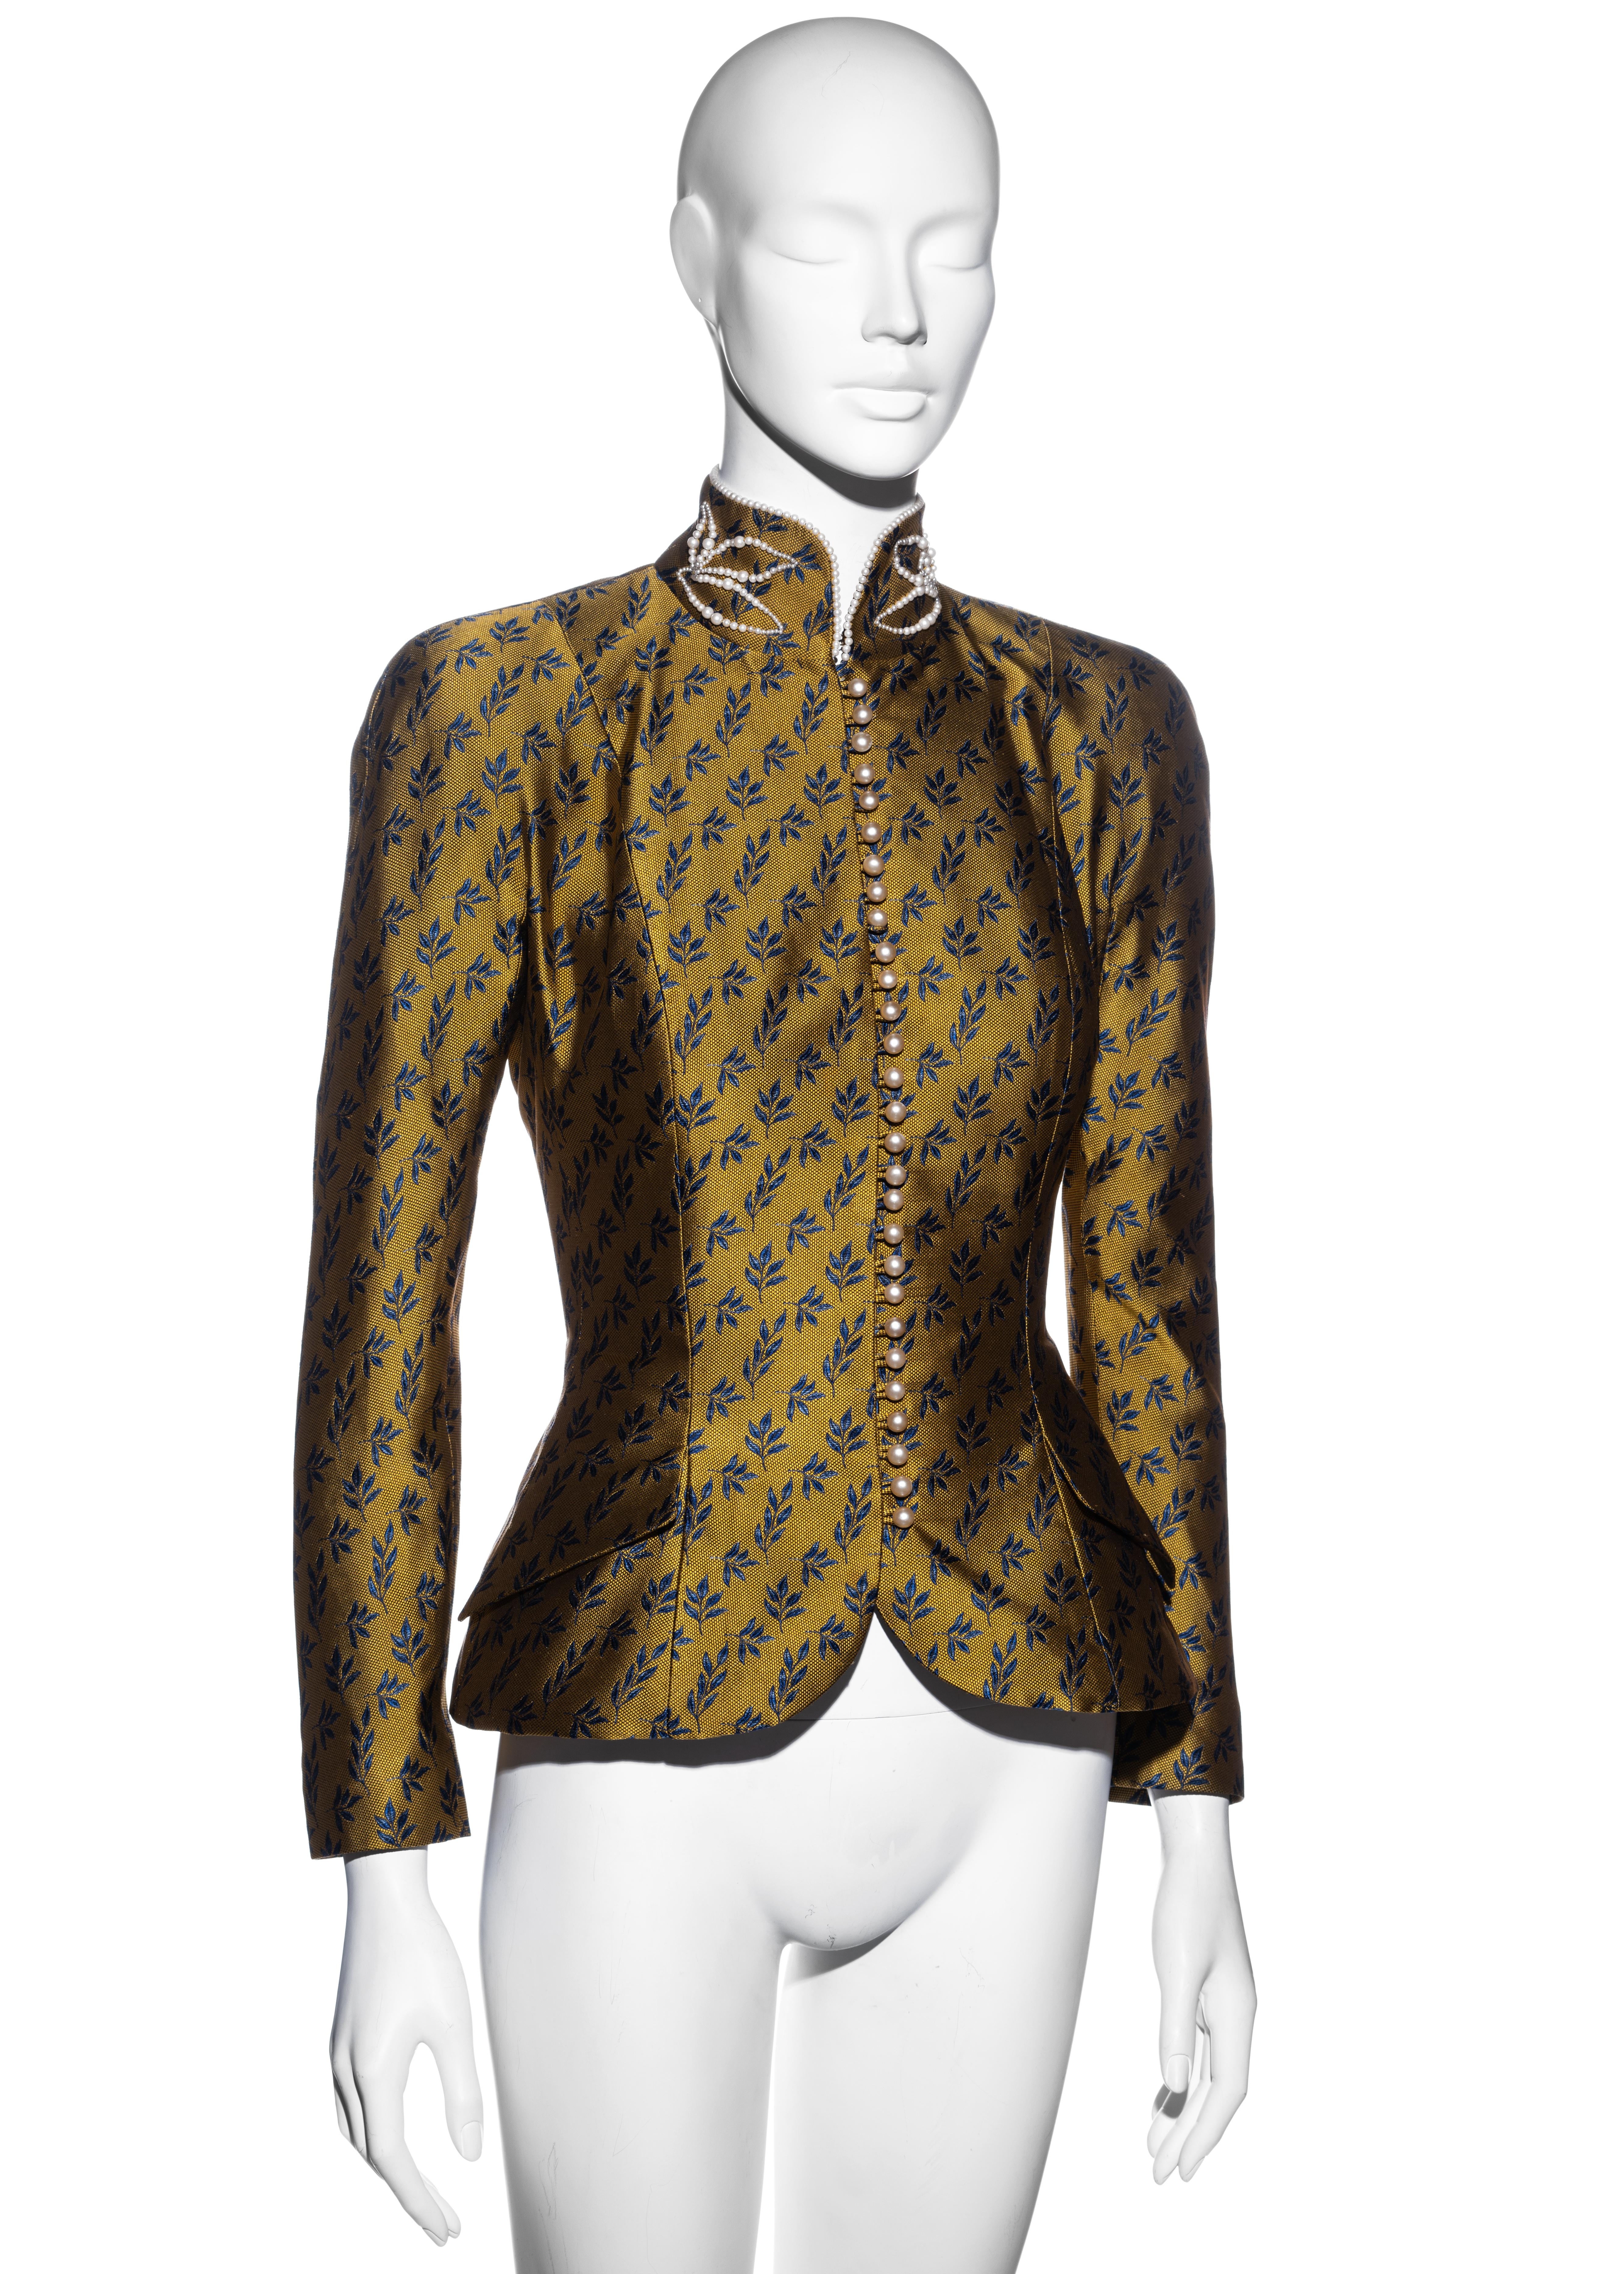 Christian Dior by John Galliano gold satin jacquard fitted jacket, fw 1997 1